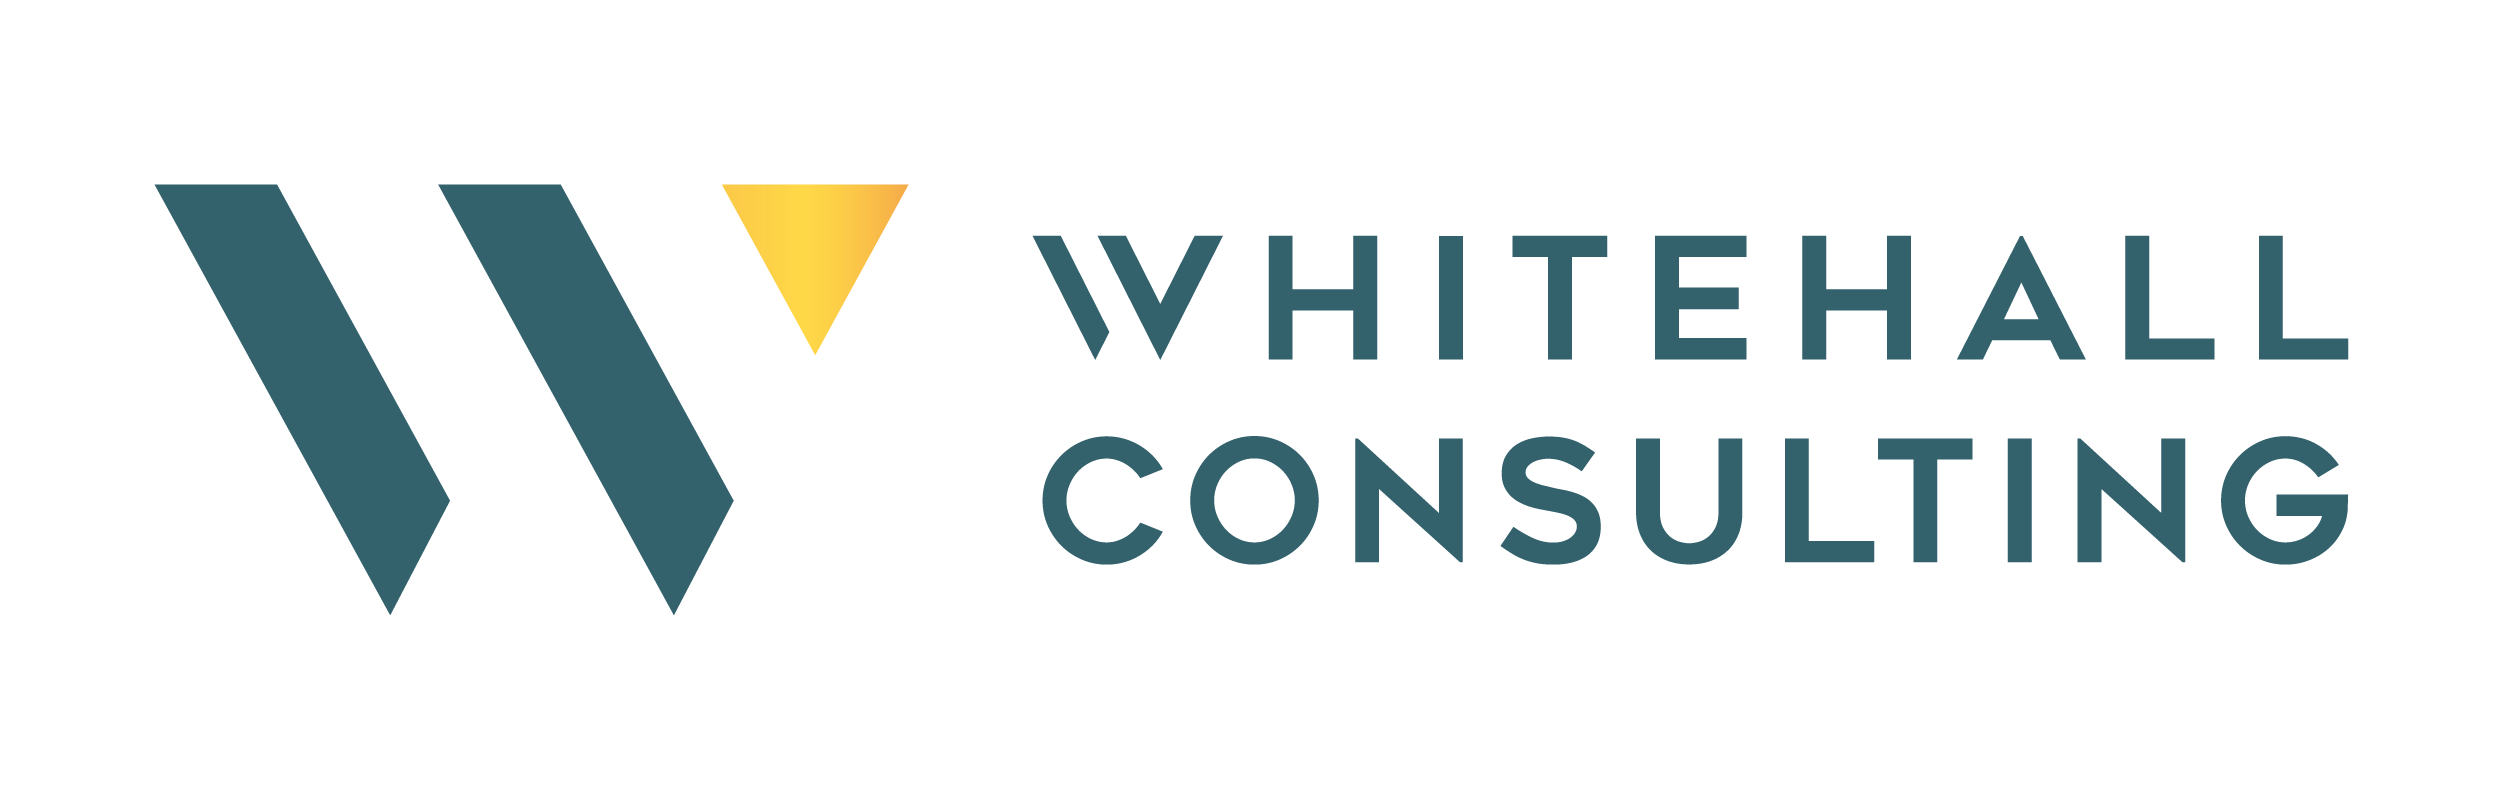 Whitehall Consulting